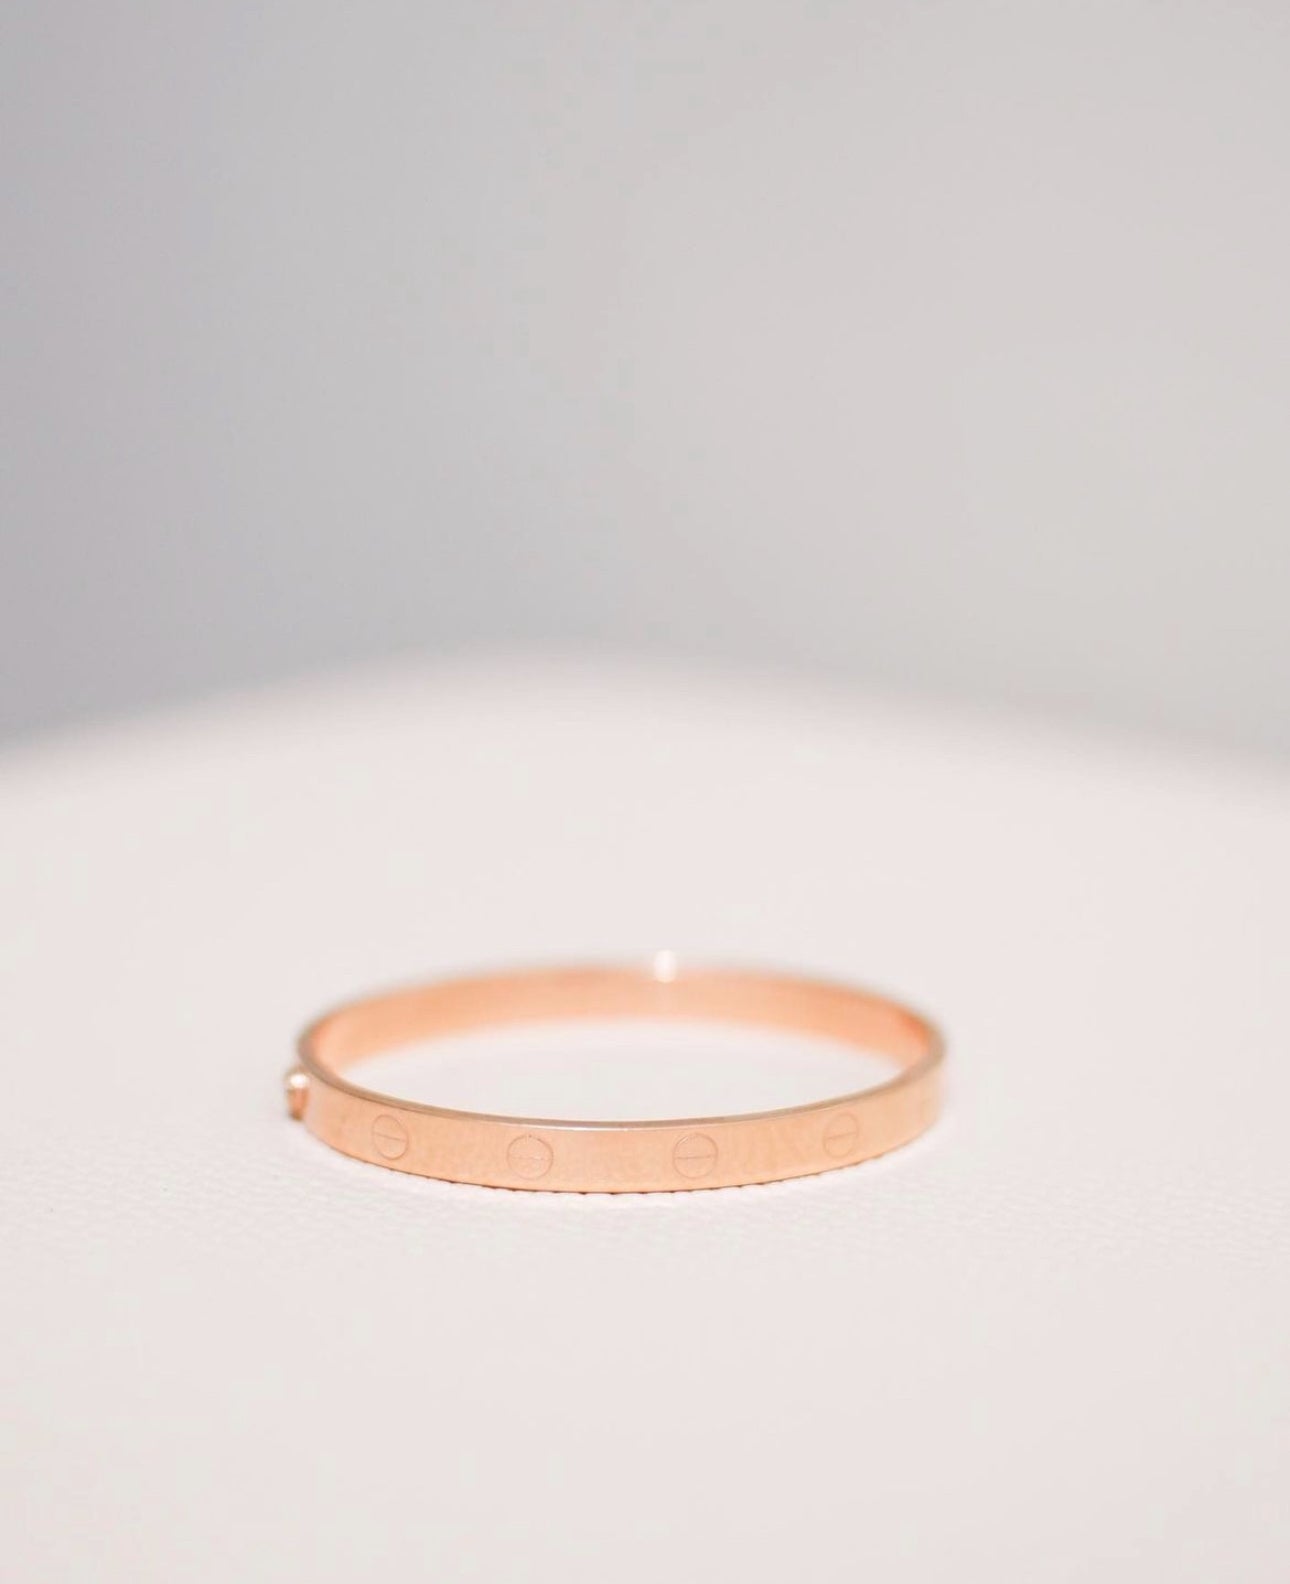 The Screw Lock 15cm Bangle in Solid Gold